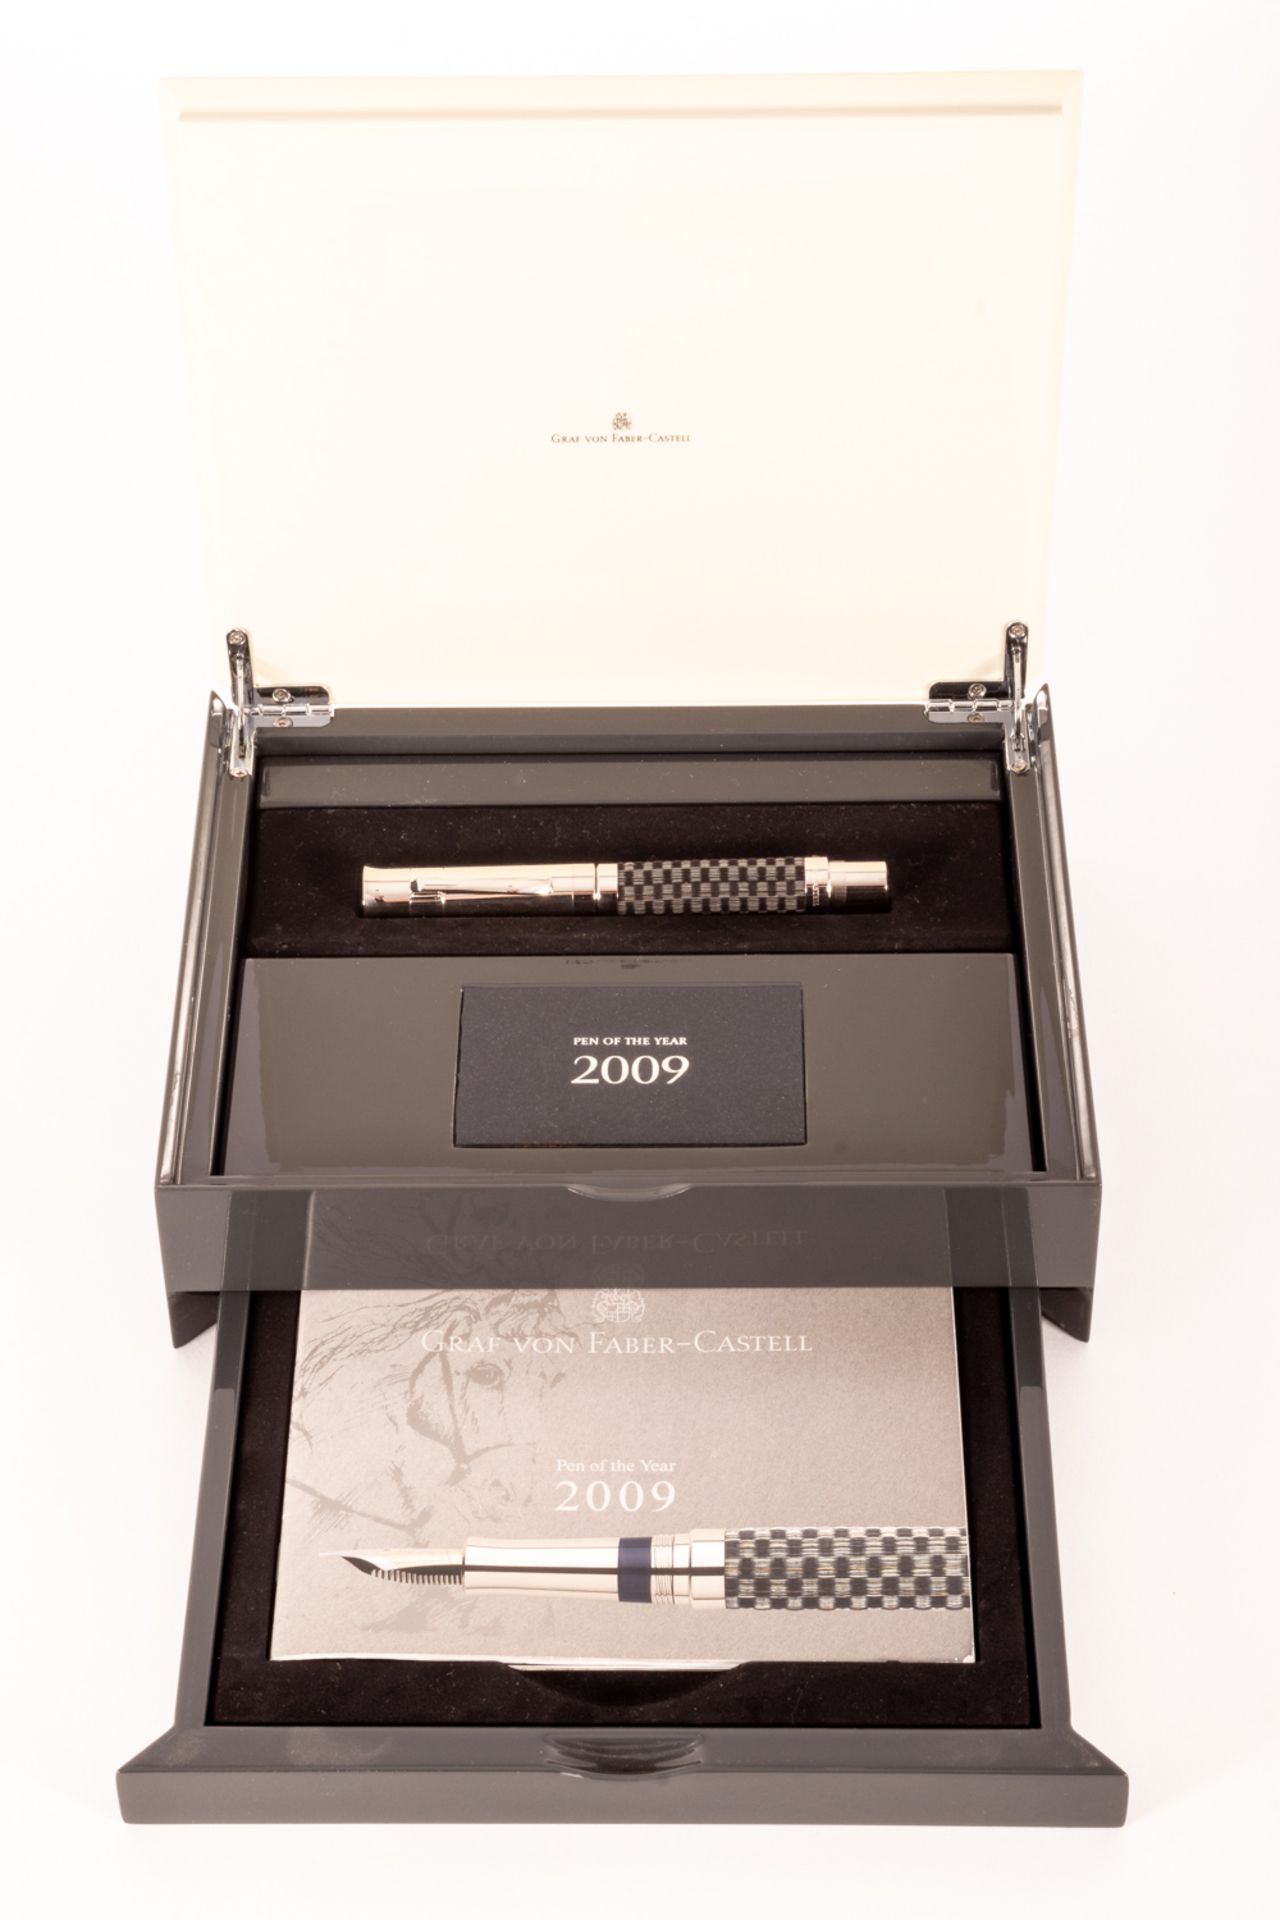 Graf von Faber-Castell fountain pen model "Pen of the year 2009". Commemorate the cave paintings tha - Bild 2 aus 4